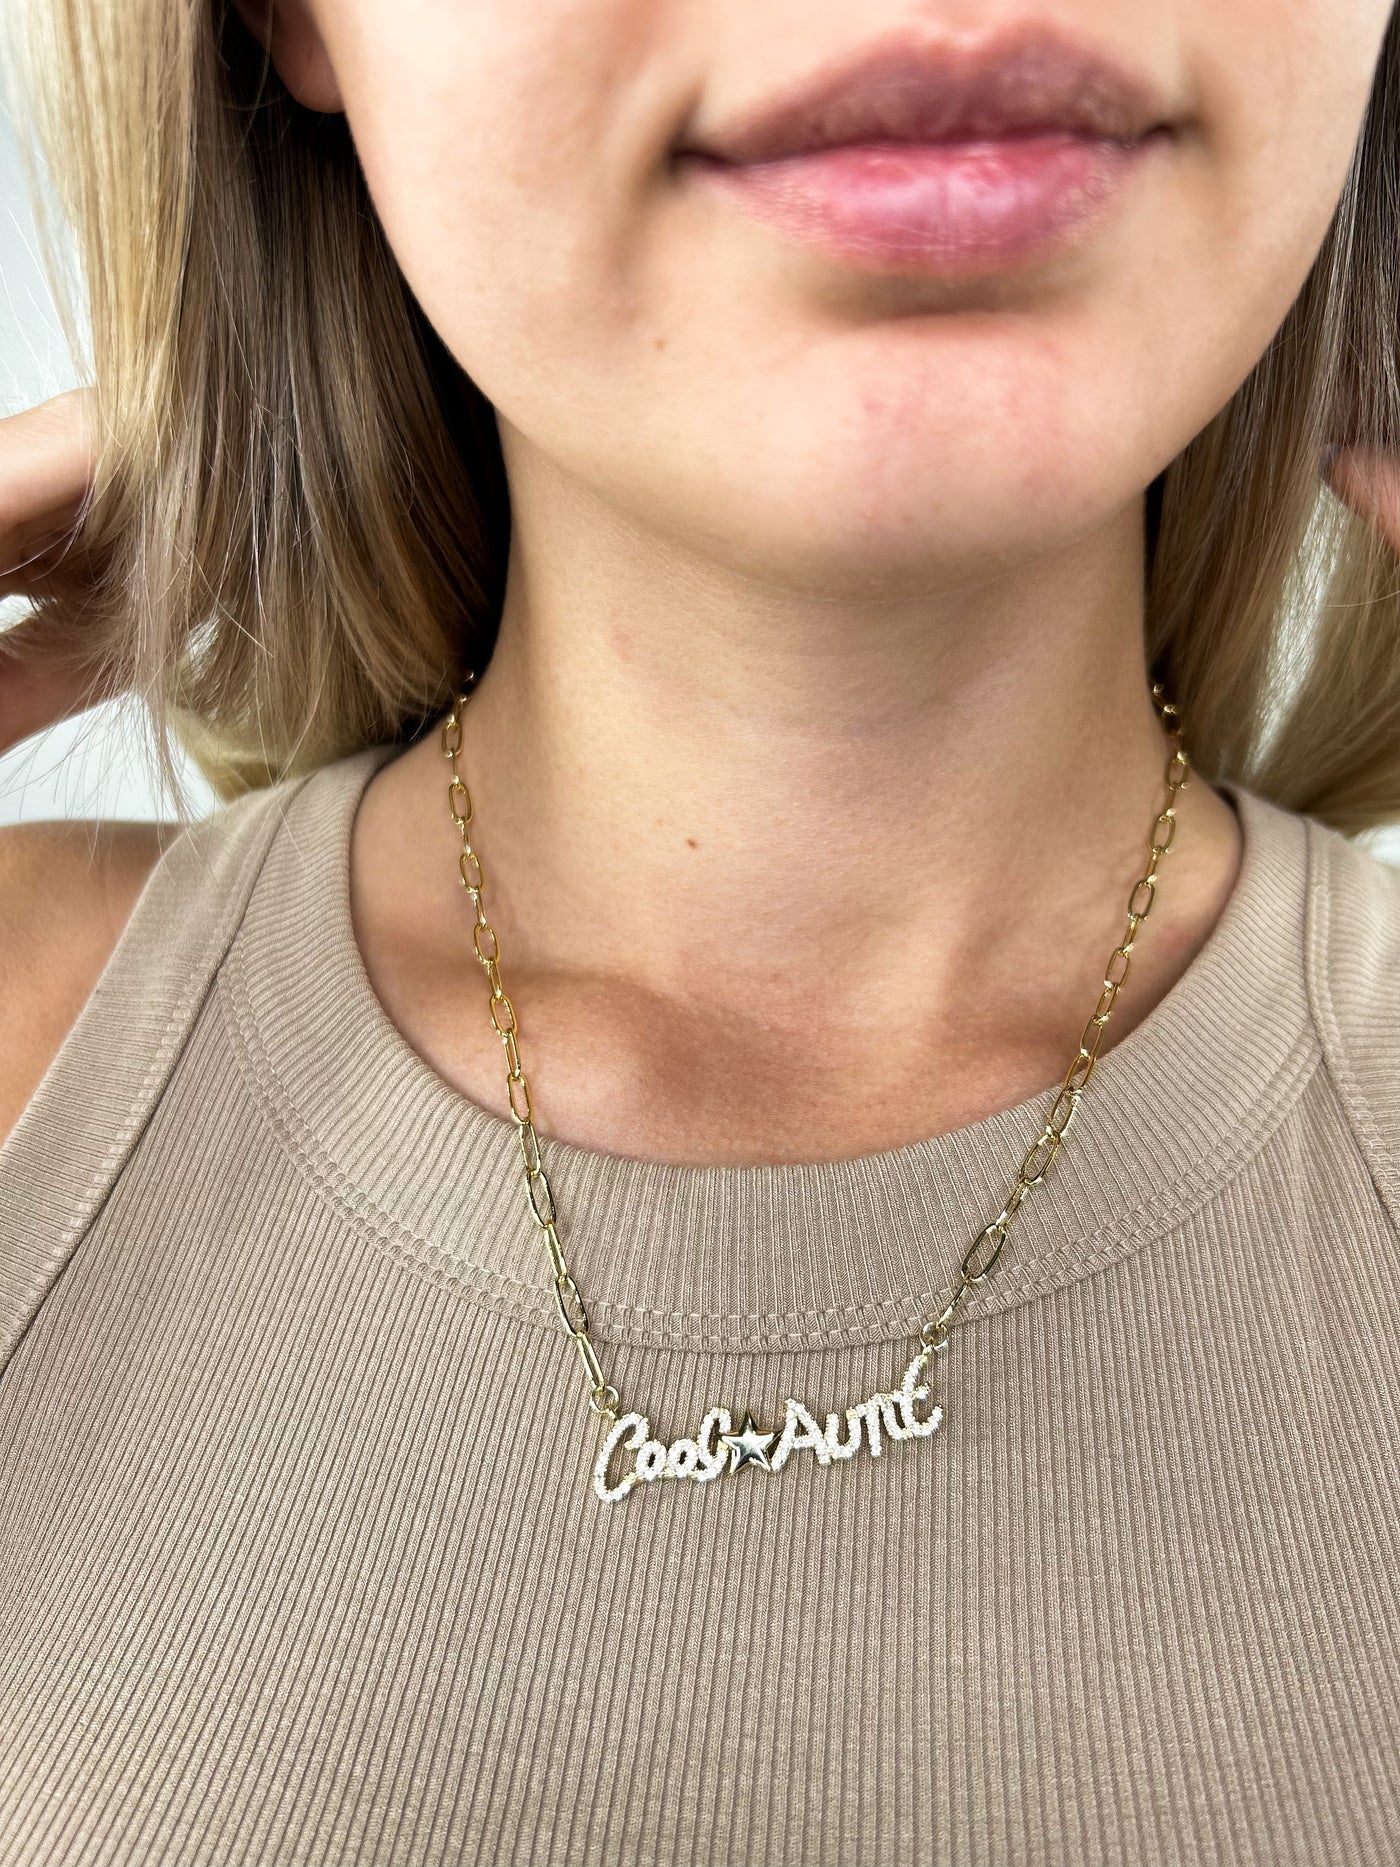 Cool Moms Necklace